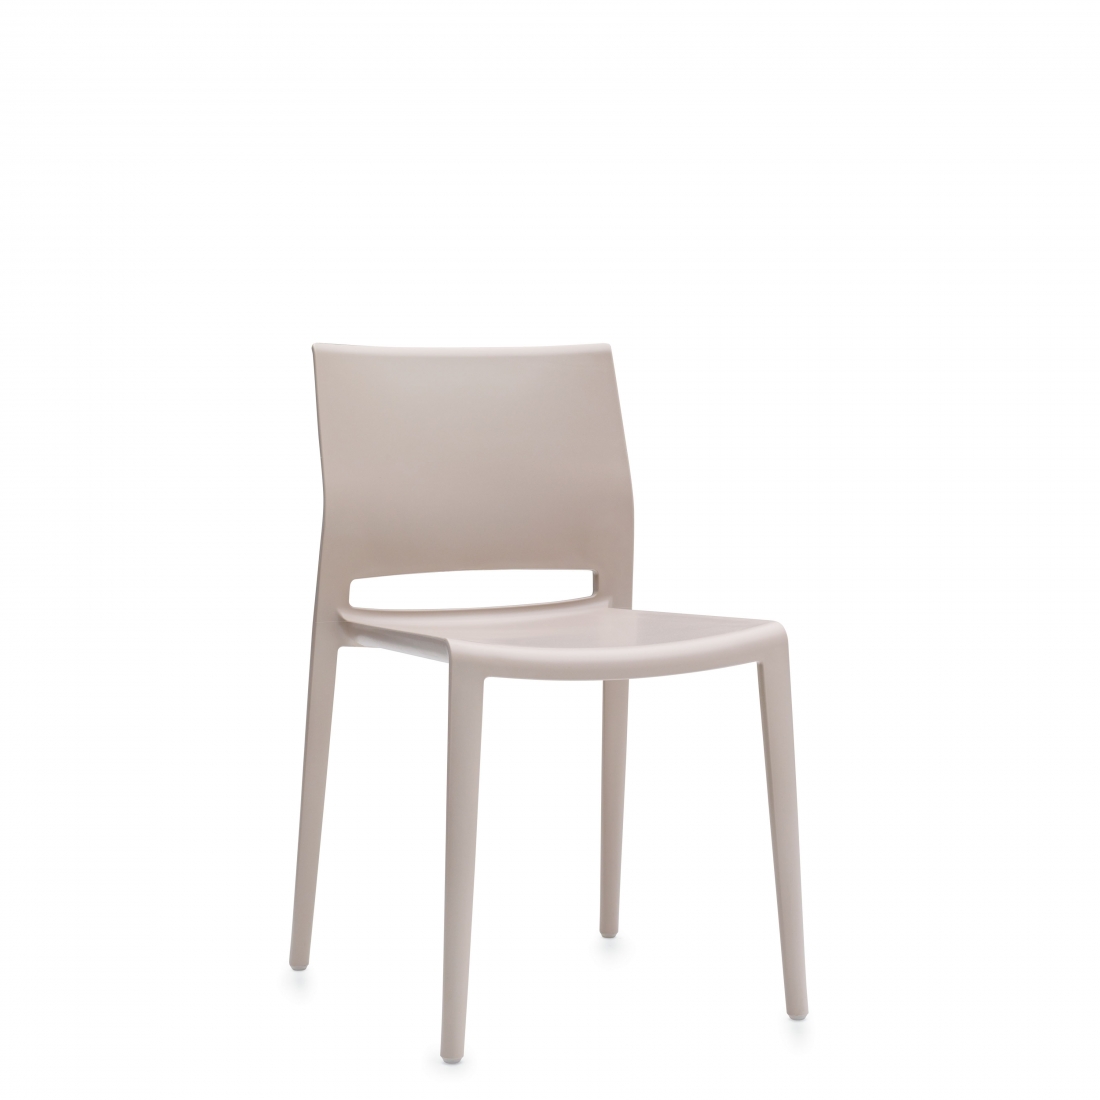 Side Chair, Polymer Seat & Back